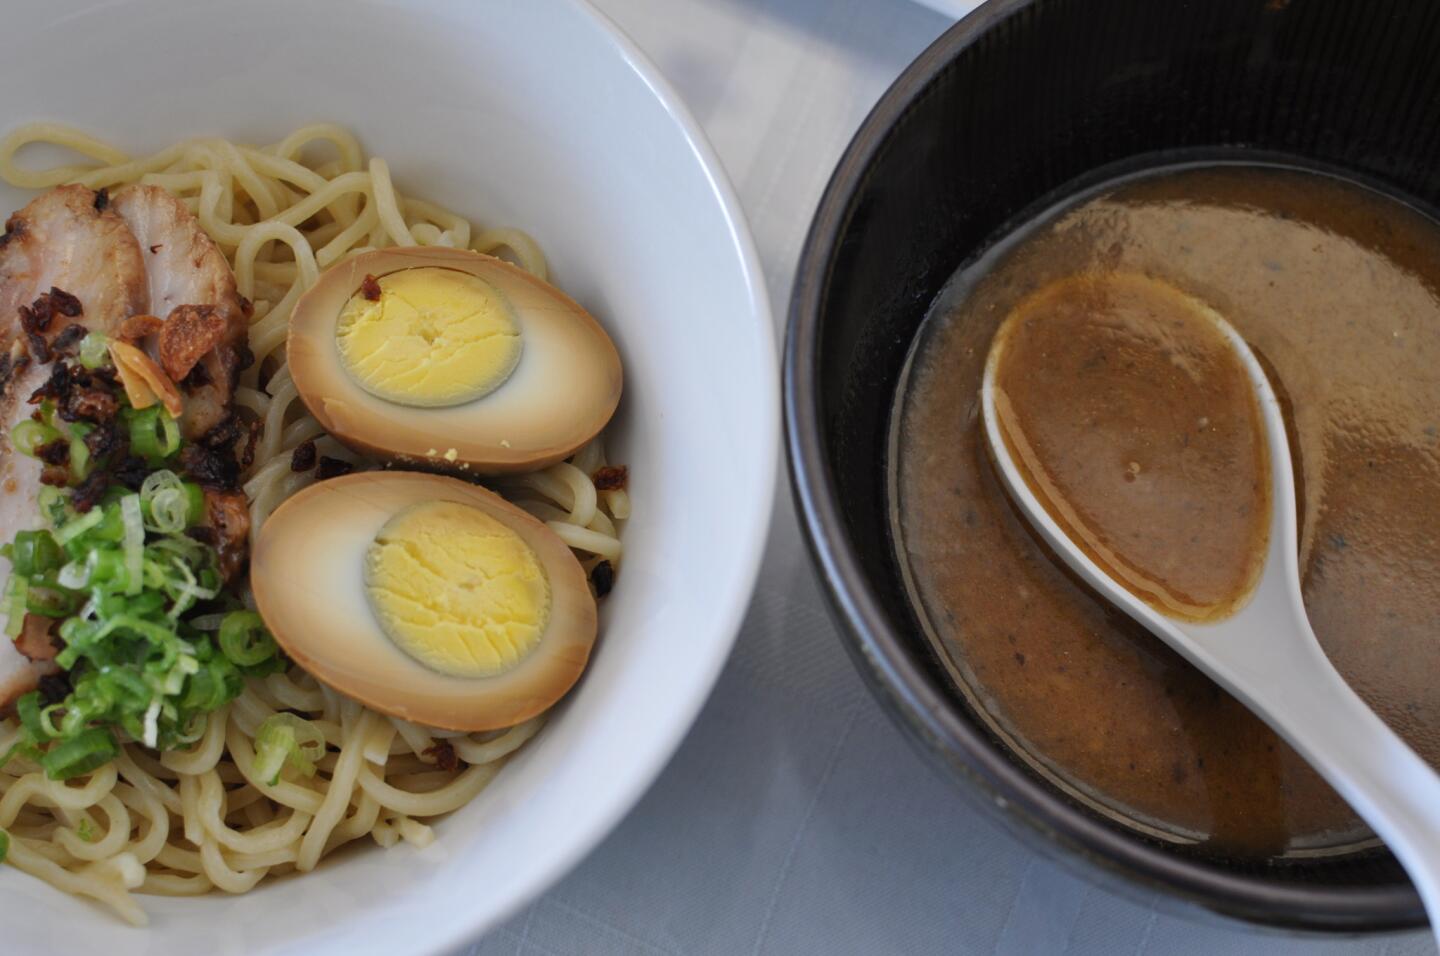 BamBiBu's tsukemen offers naked bouncy noodles, ready to dip into a heavy pork broth.